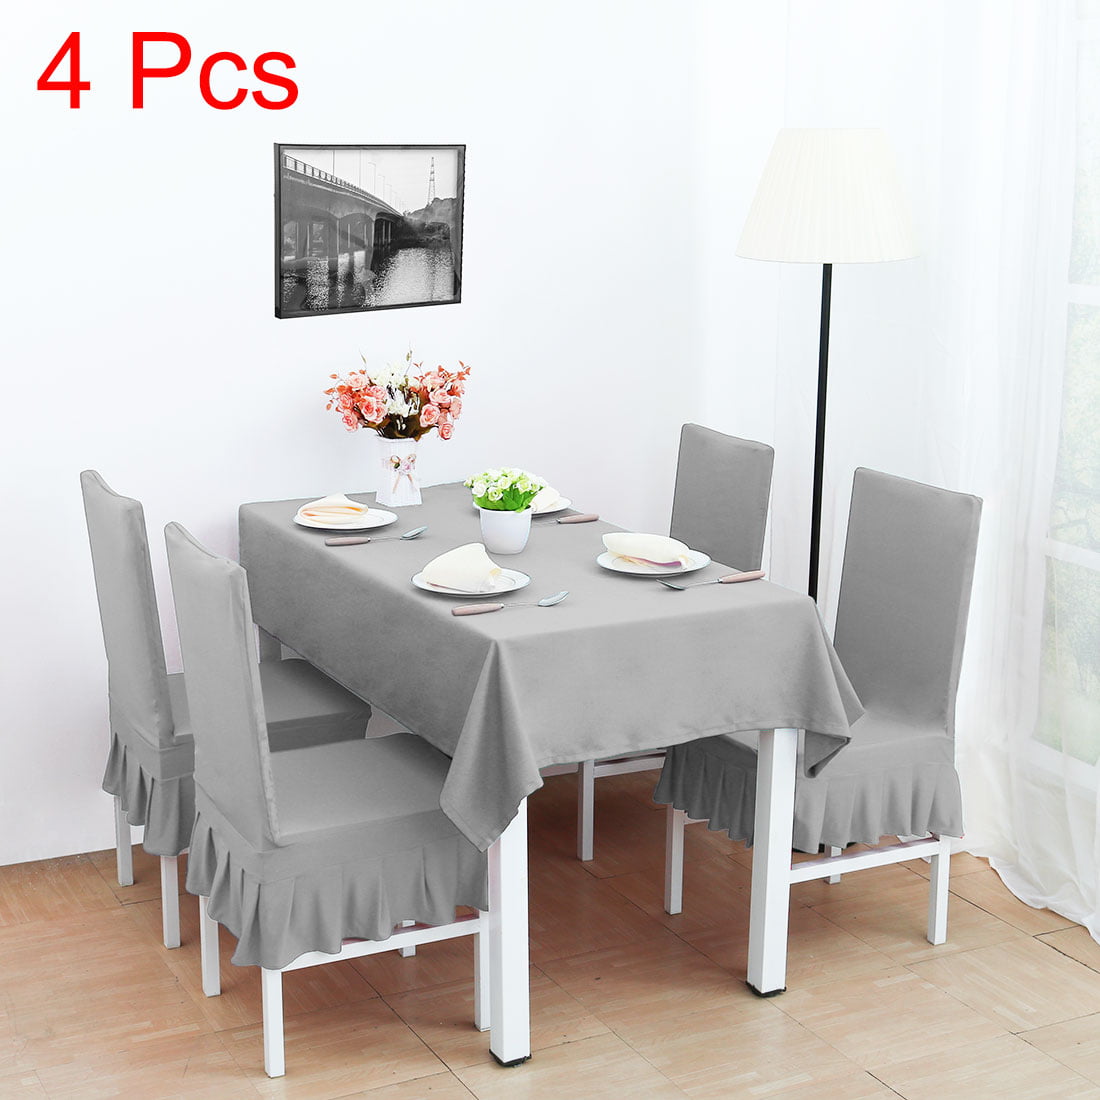 Details about   Slipcovers Elastic Chair Cover Stretch Dining Room Seat Cover 4-Season 